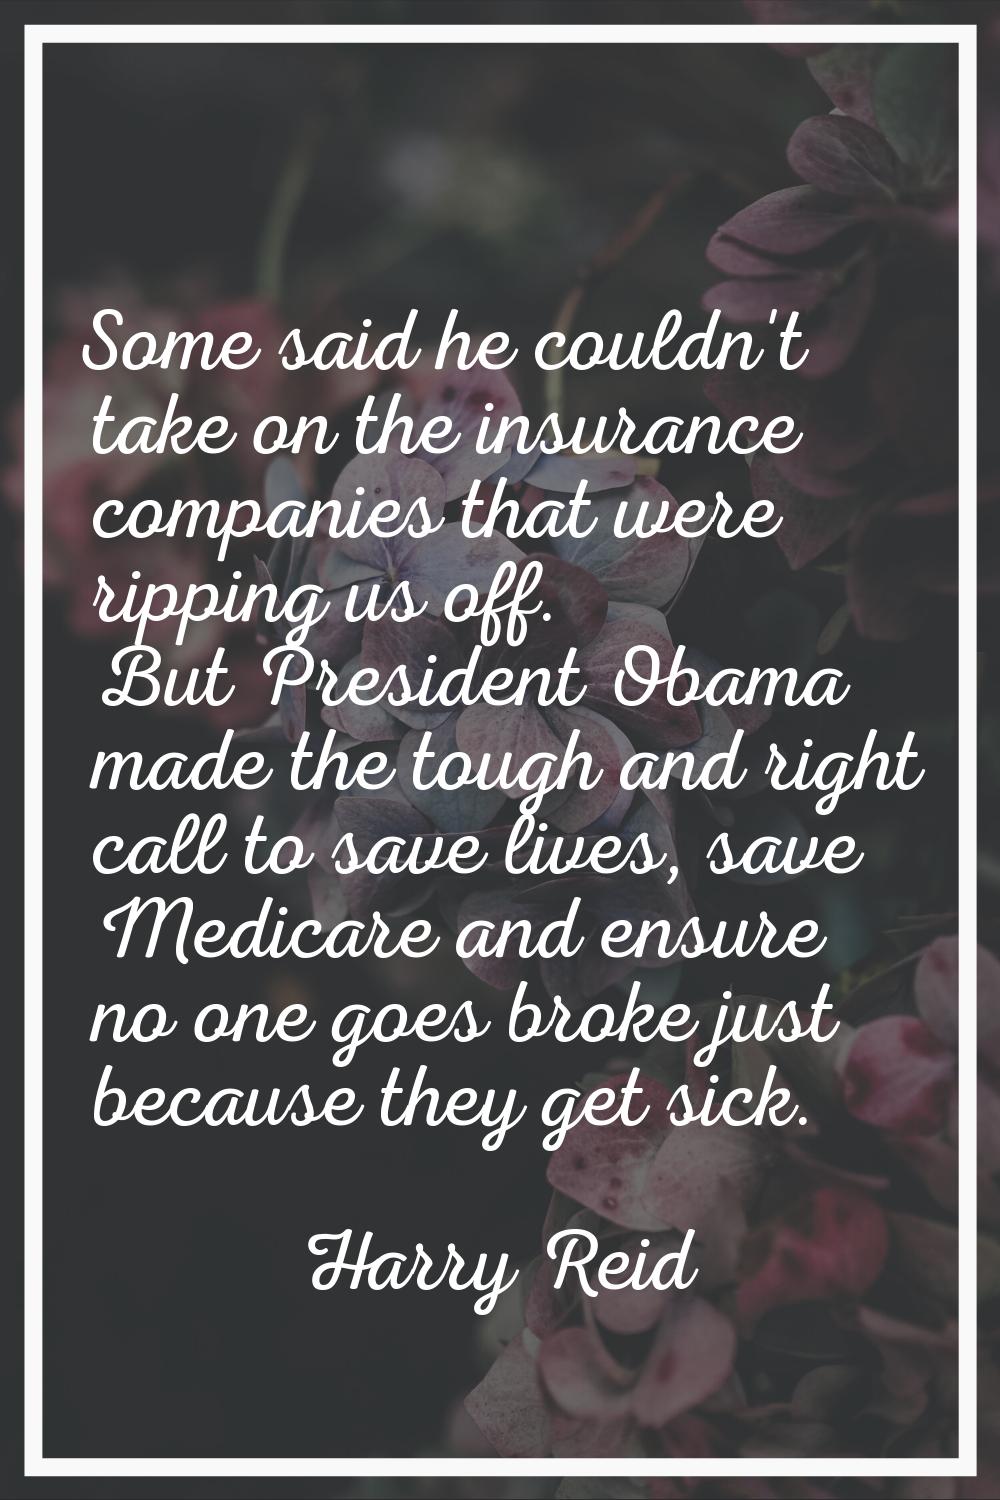 Some said he couldn't take on the insurance companies that were ripping us off. But President Obama